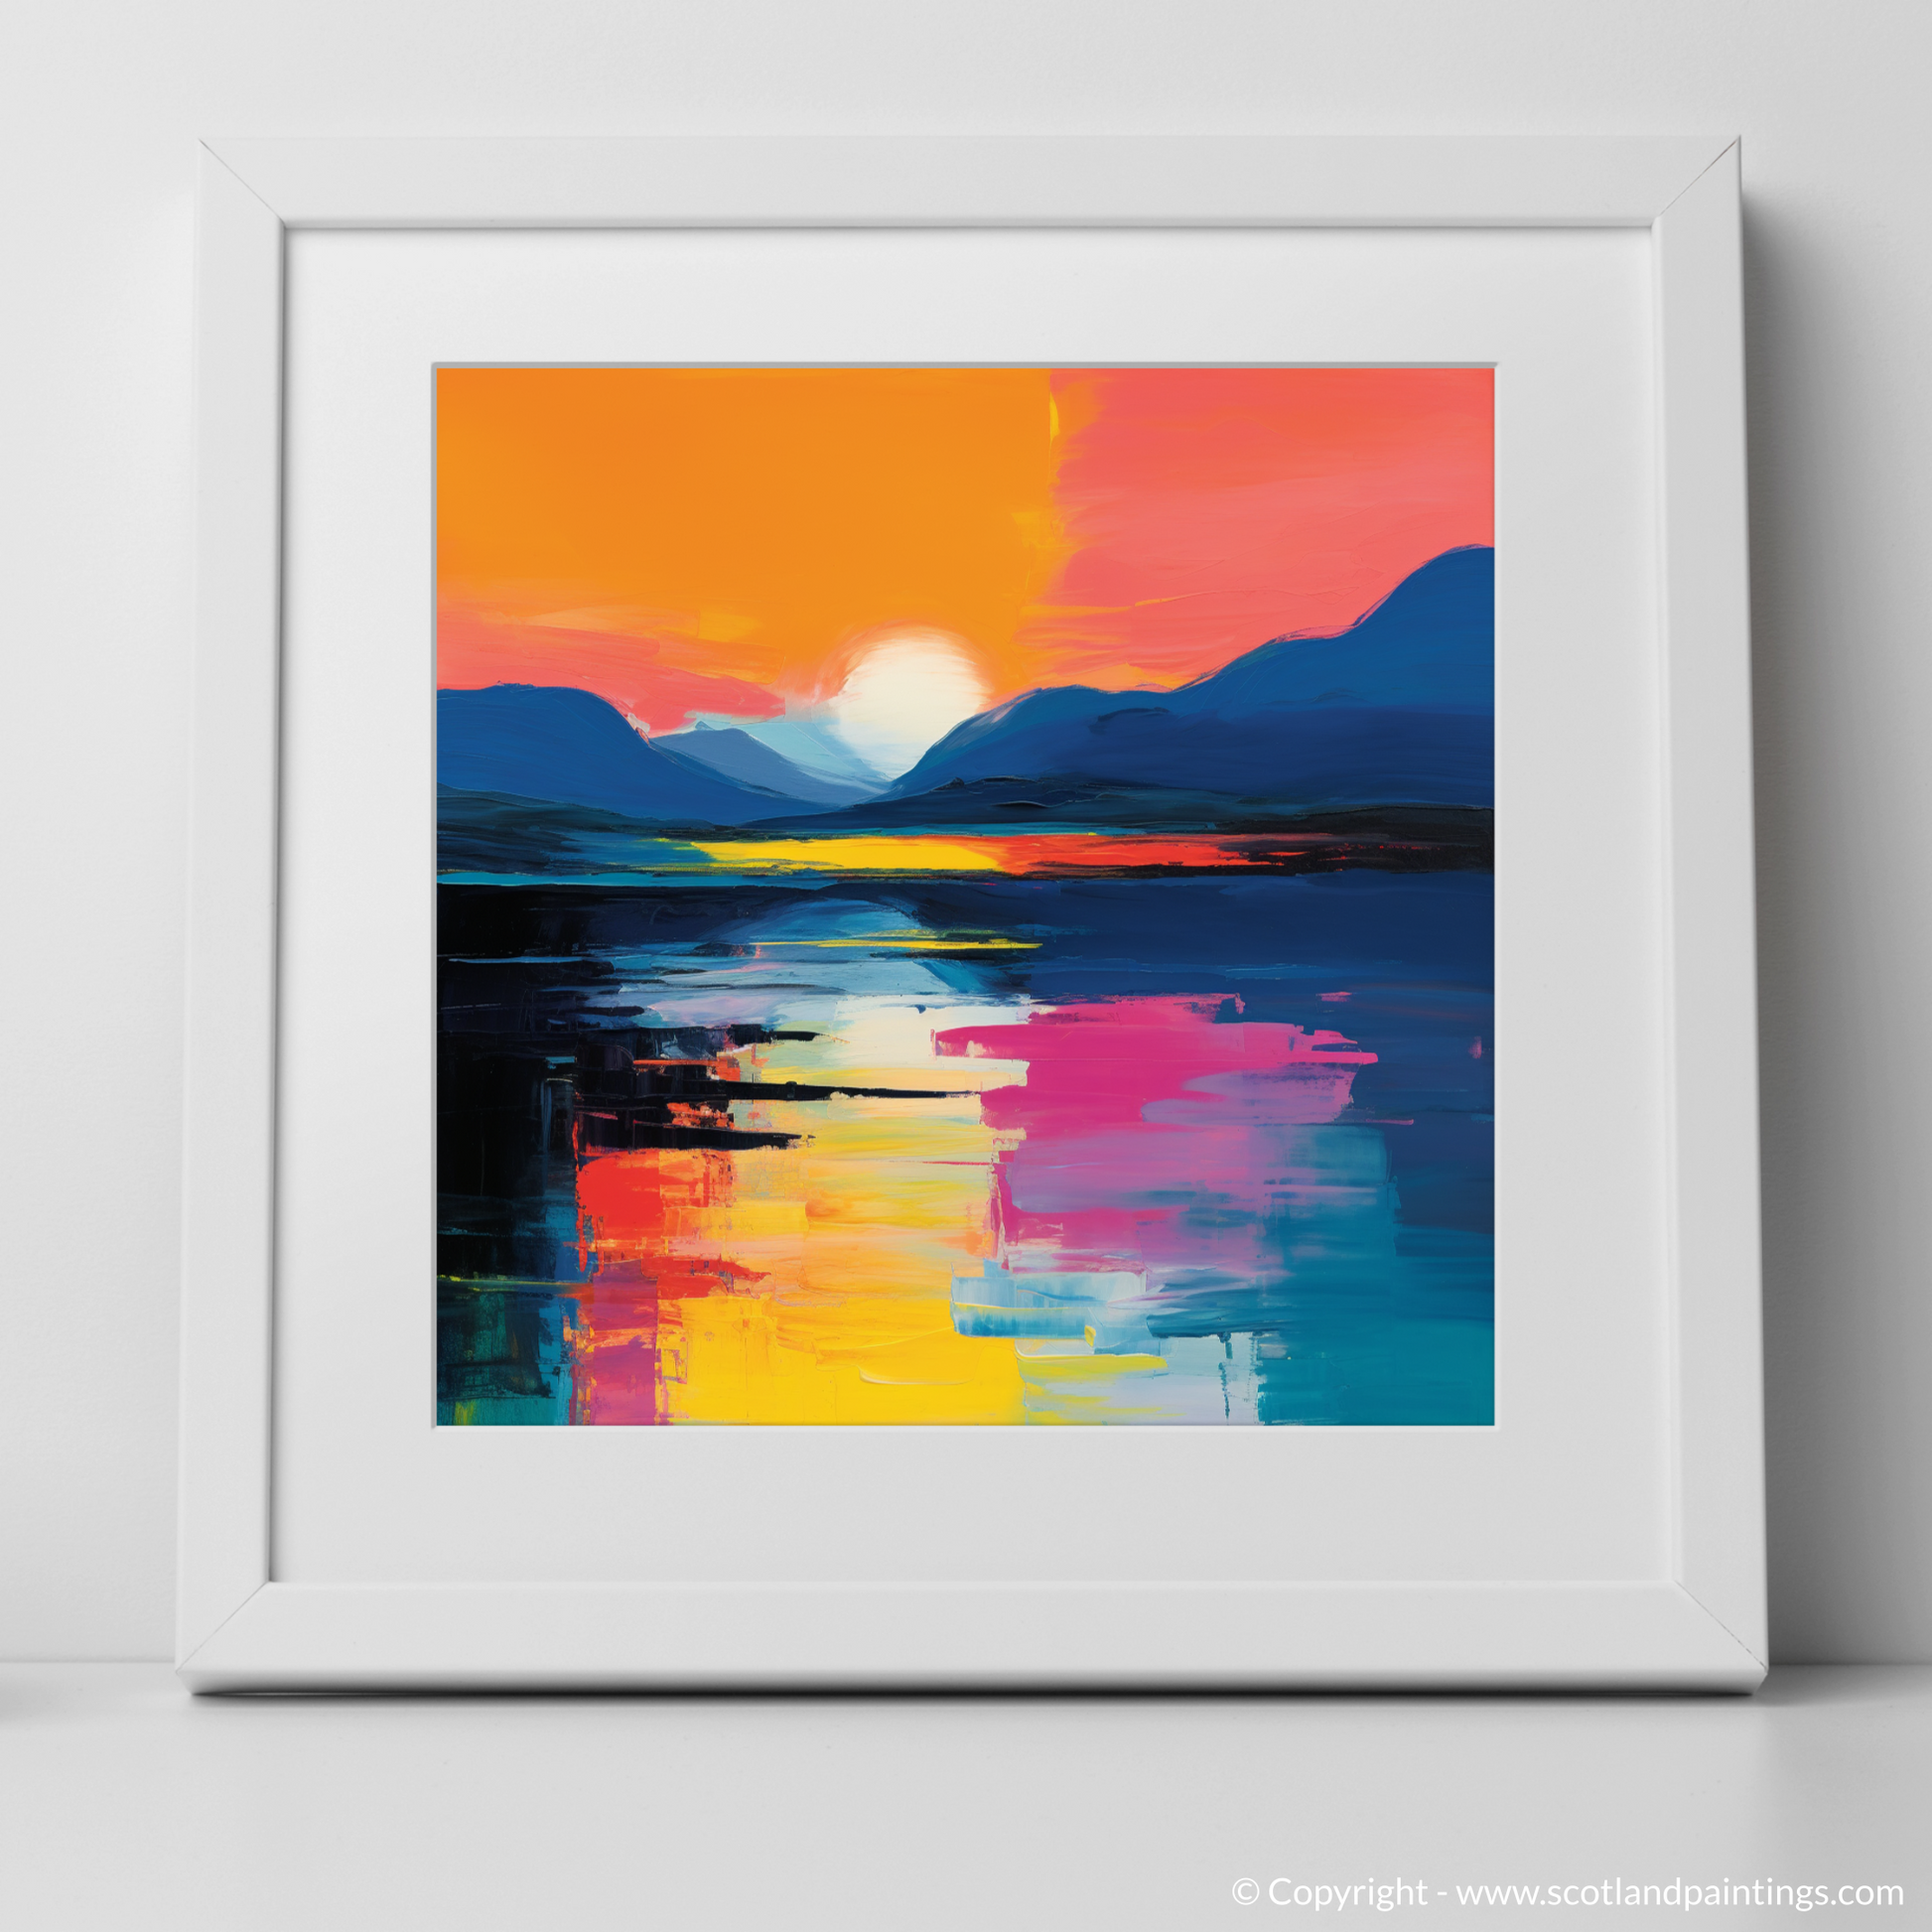 Art Print of Twilight reflections on Loch Lomond with a white frame